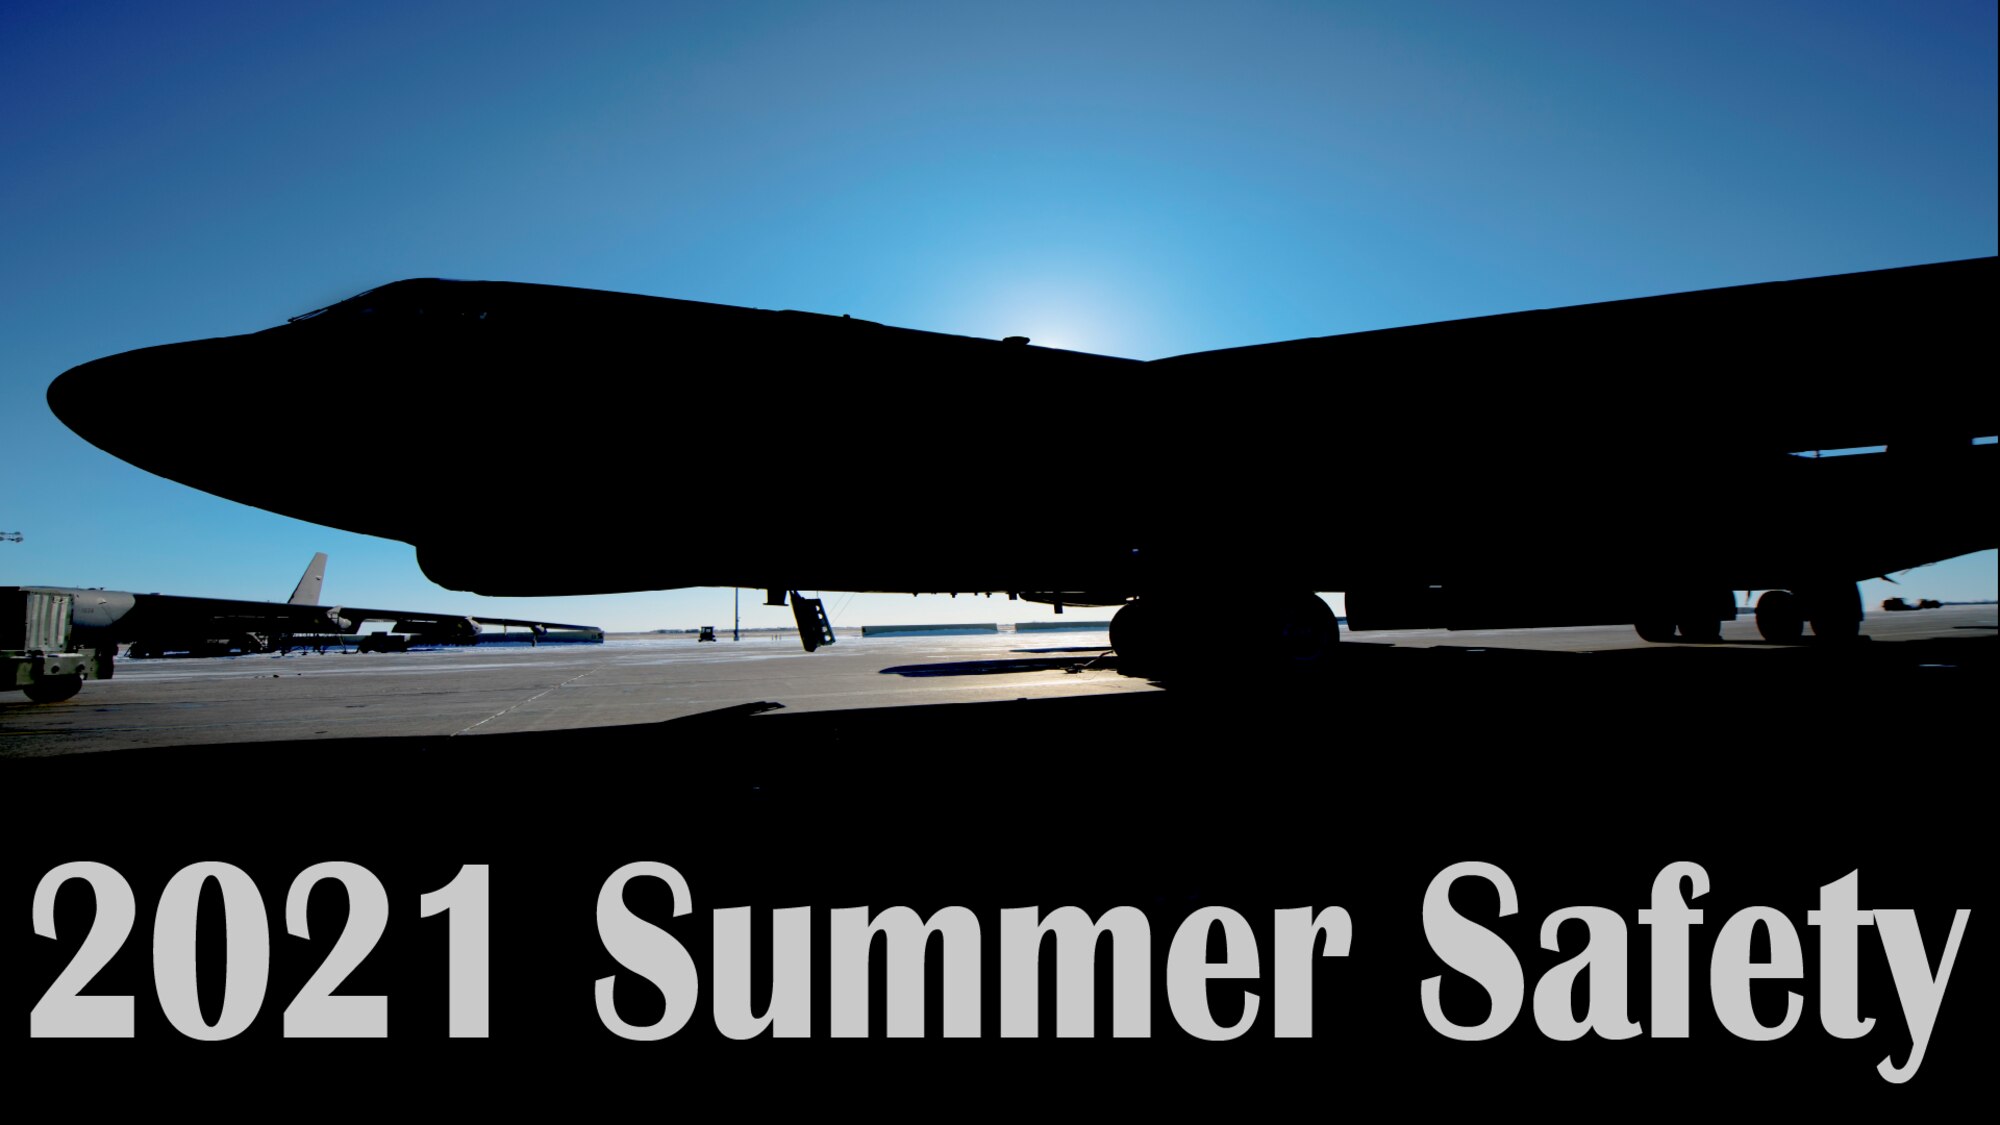 Sun rising behind B52 Stratofortress silhouette. Text 2021 Summer Safety